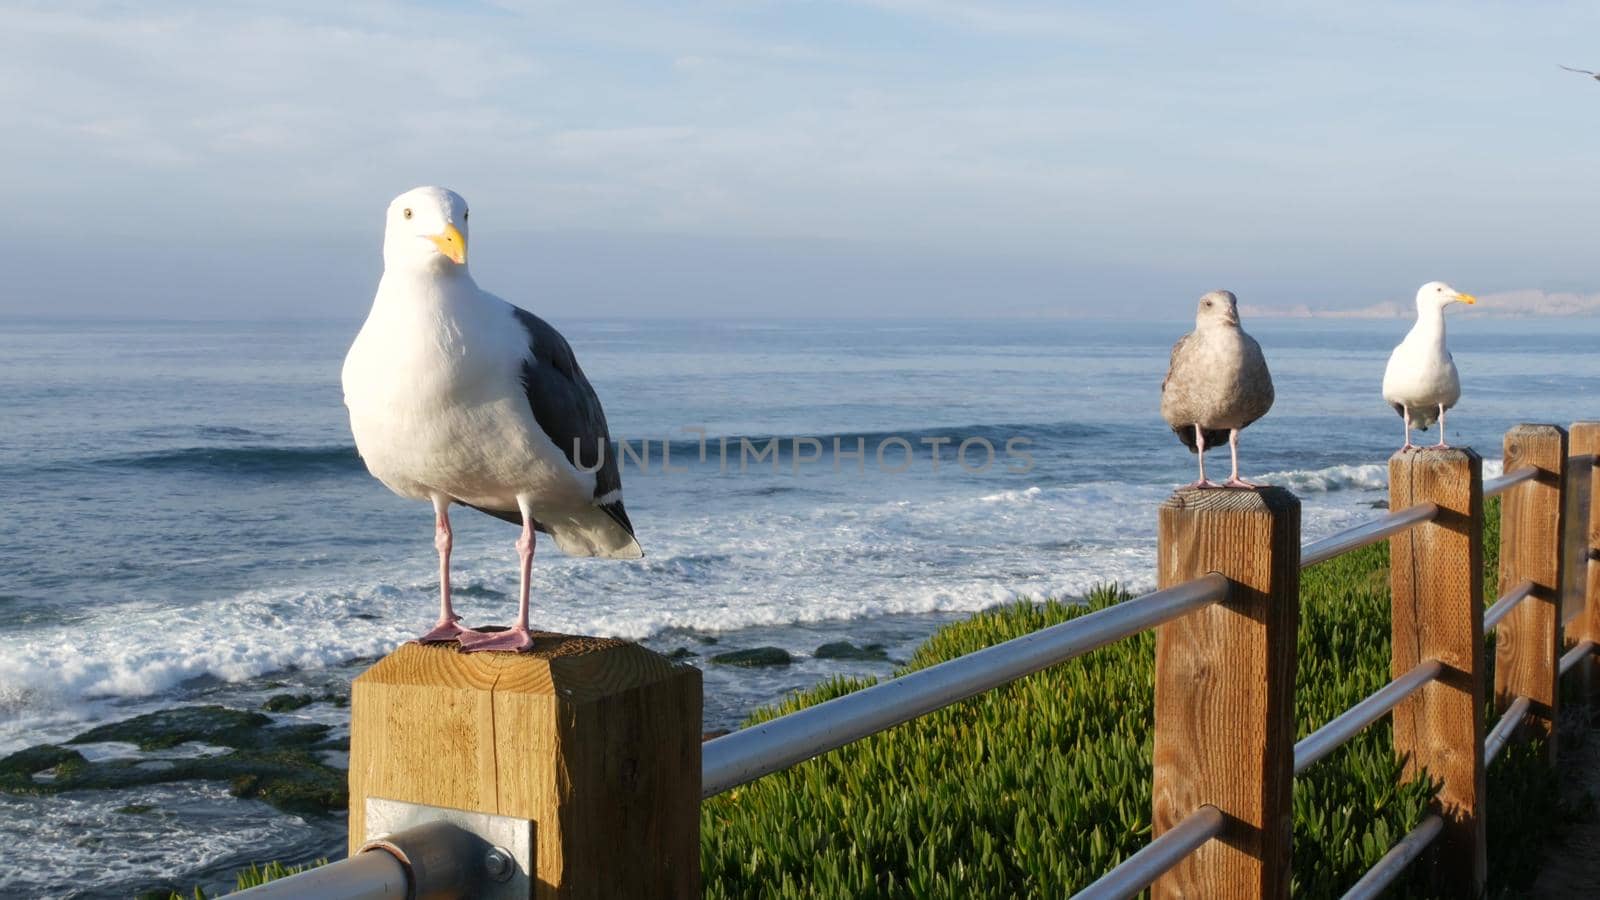 Funny sea gull birds on railings. Seagulls and green pigface sour fig succulent, pacific ocean splashing waves. Ice plant greenery on steep cliff. Vista point in La Jolla, San Diego, California USA.